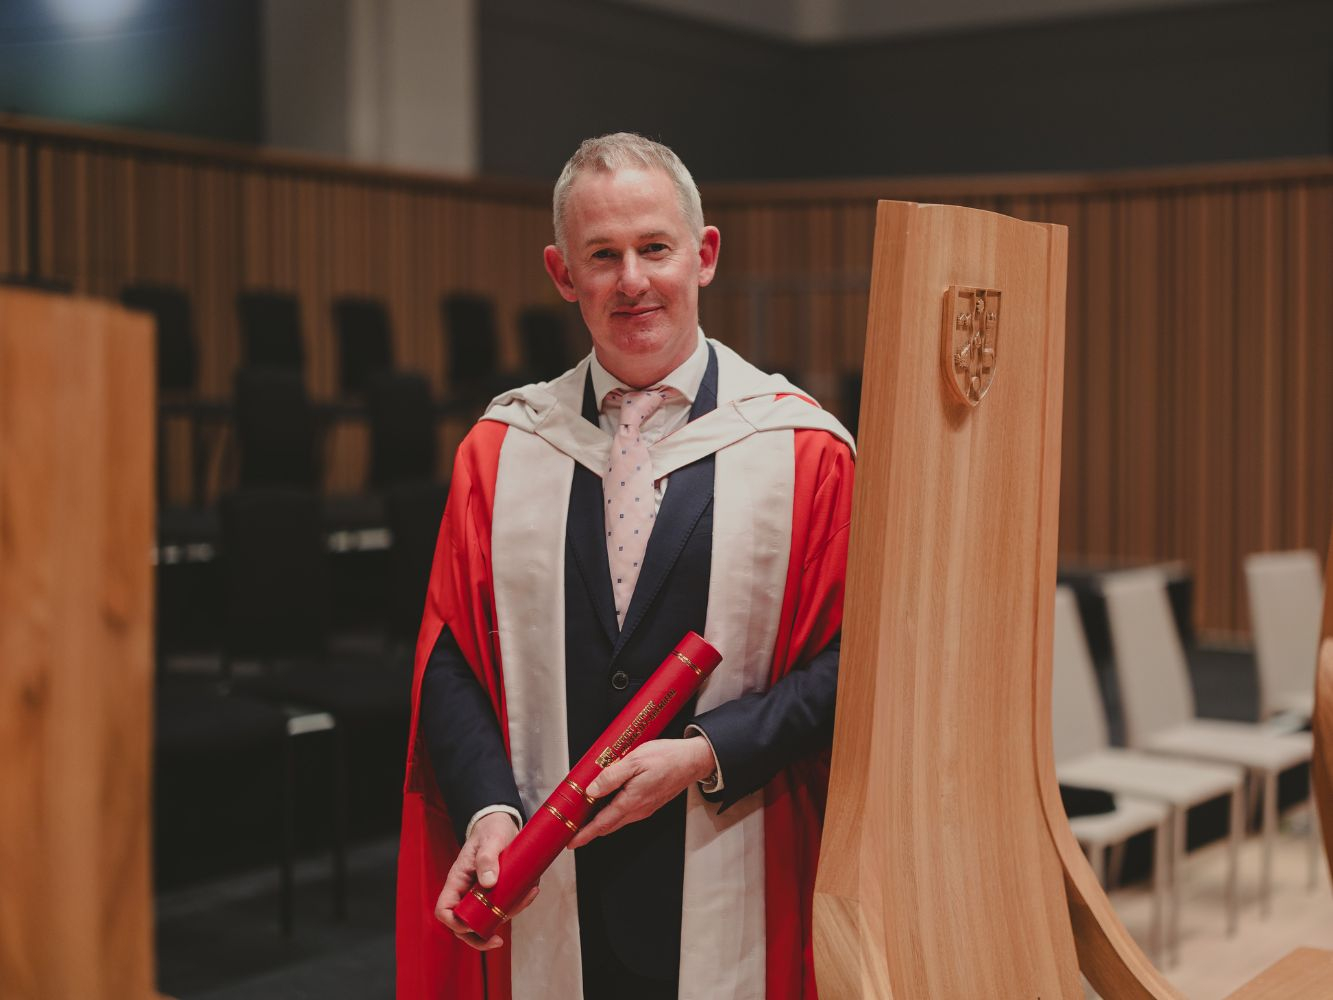 Mark standing on the stage, posing with his degree and leaning on a chair